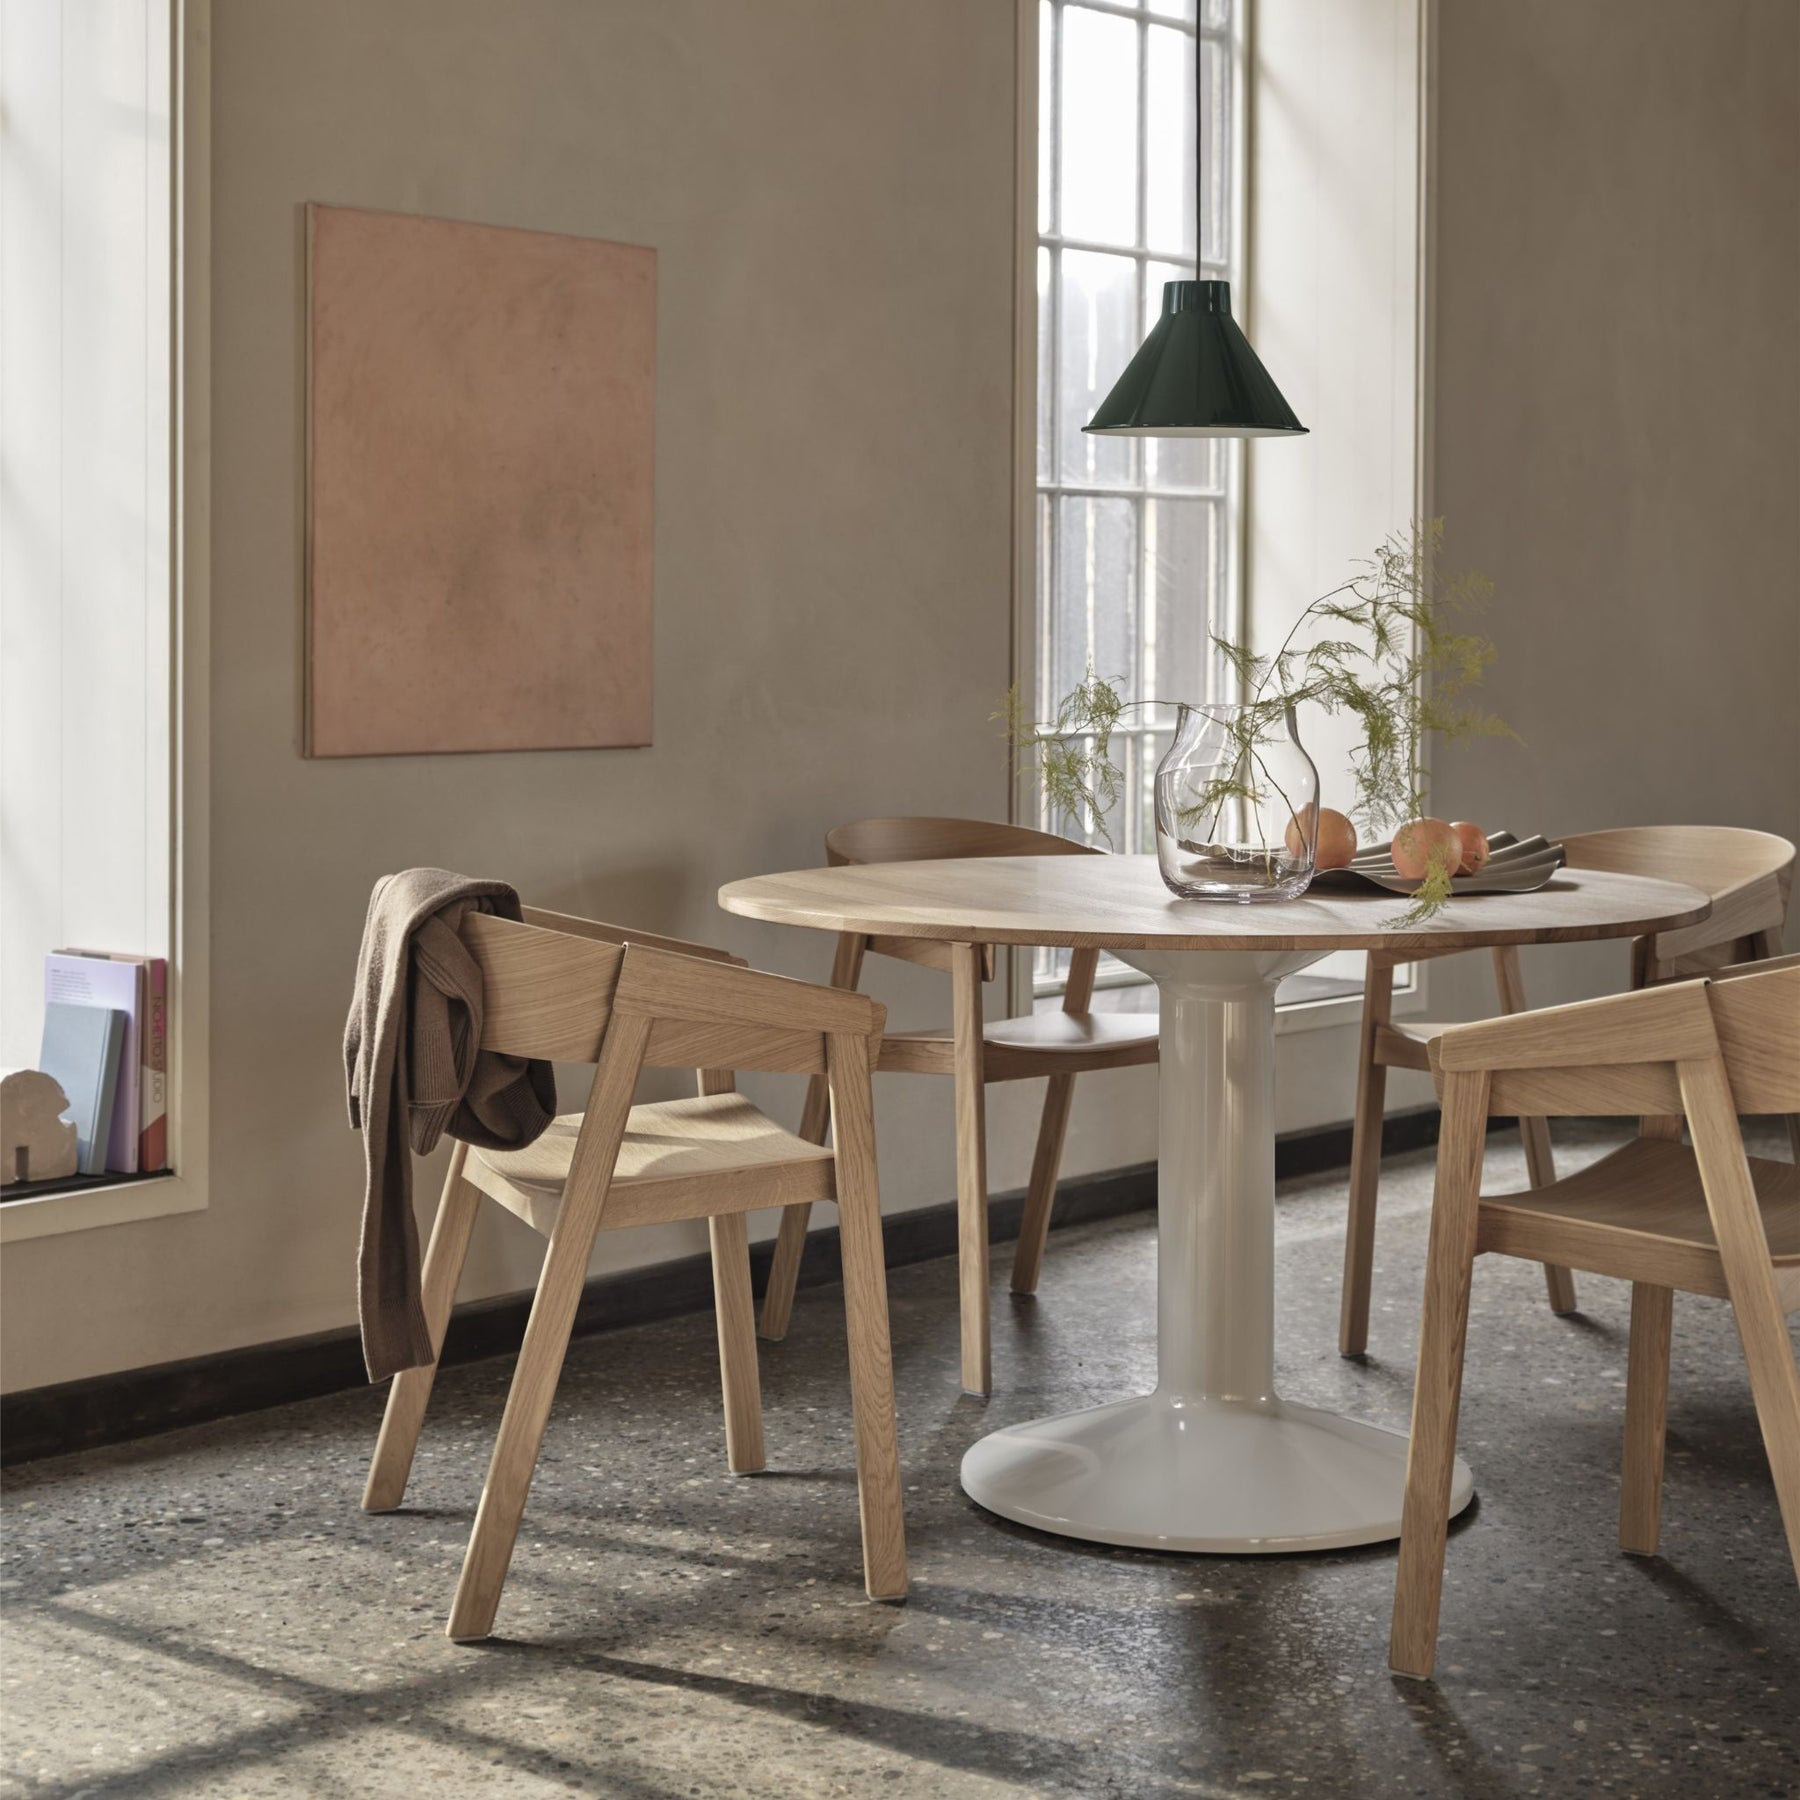 Muuto Cover Armchairs with Midst Dining Table in Copenhagen Loft